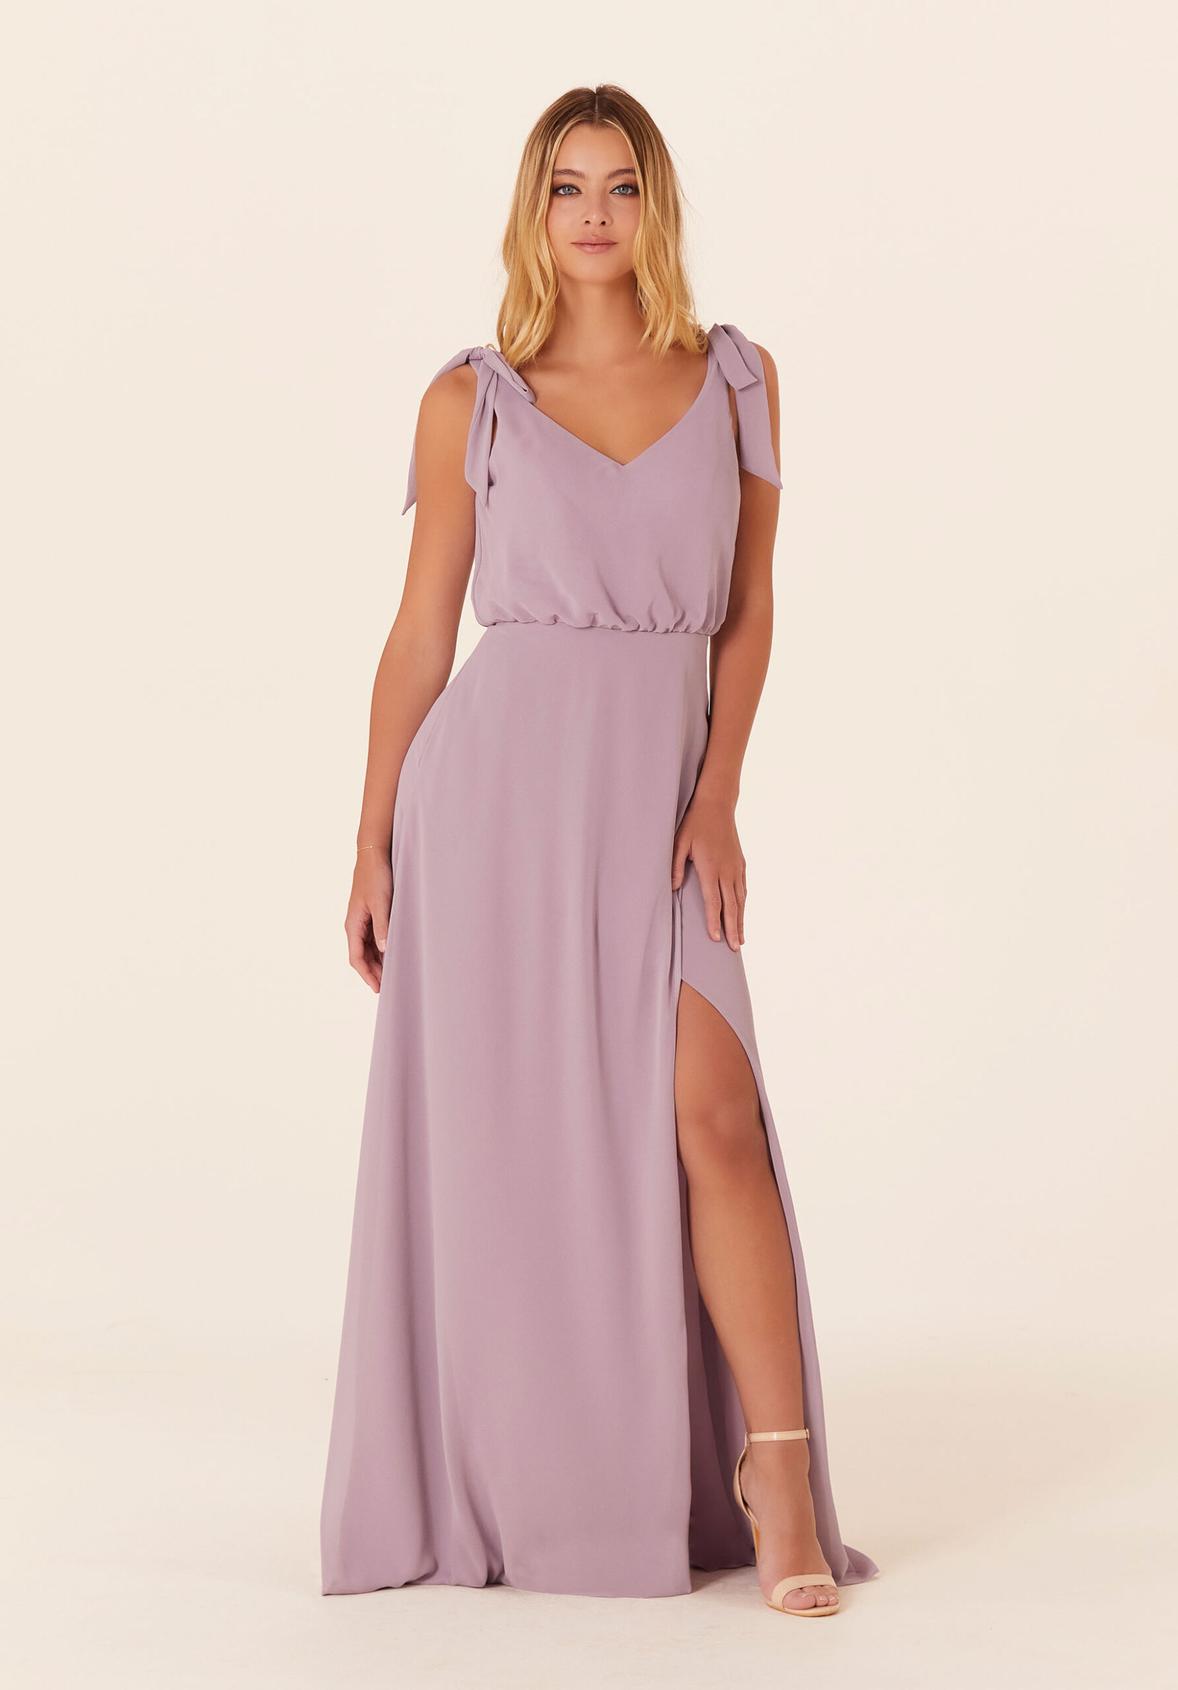 Chiffon Bridesmaid Dress with Tied Bow Straps offers in Morilee